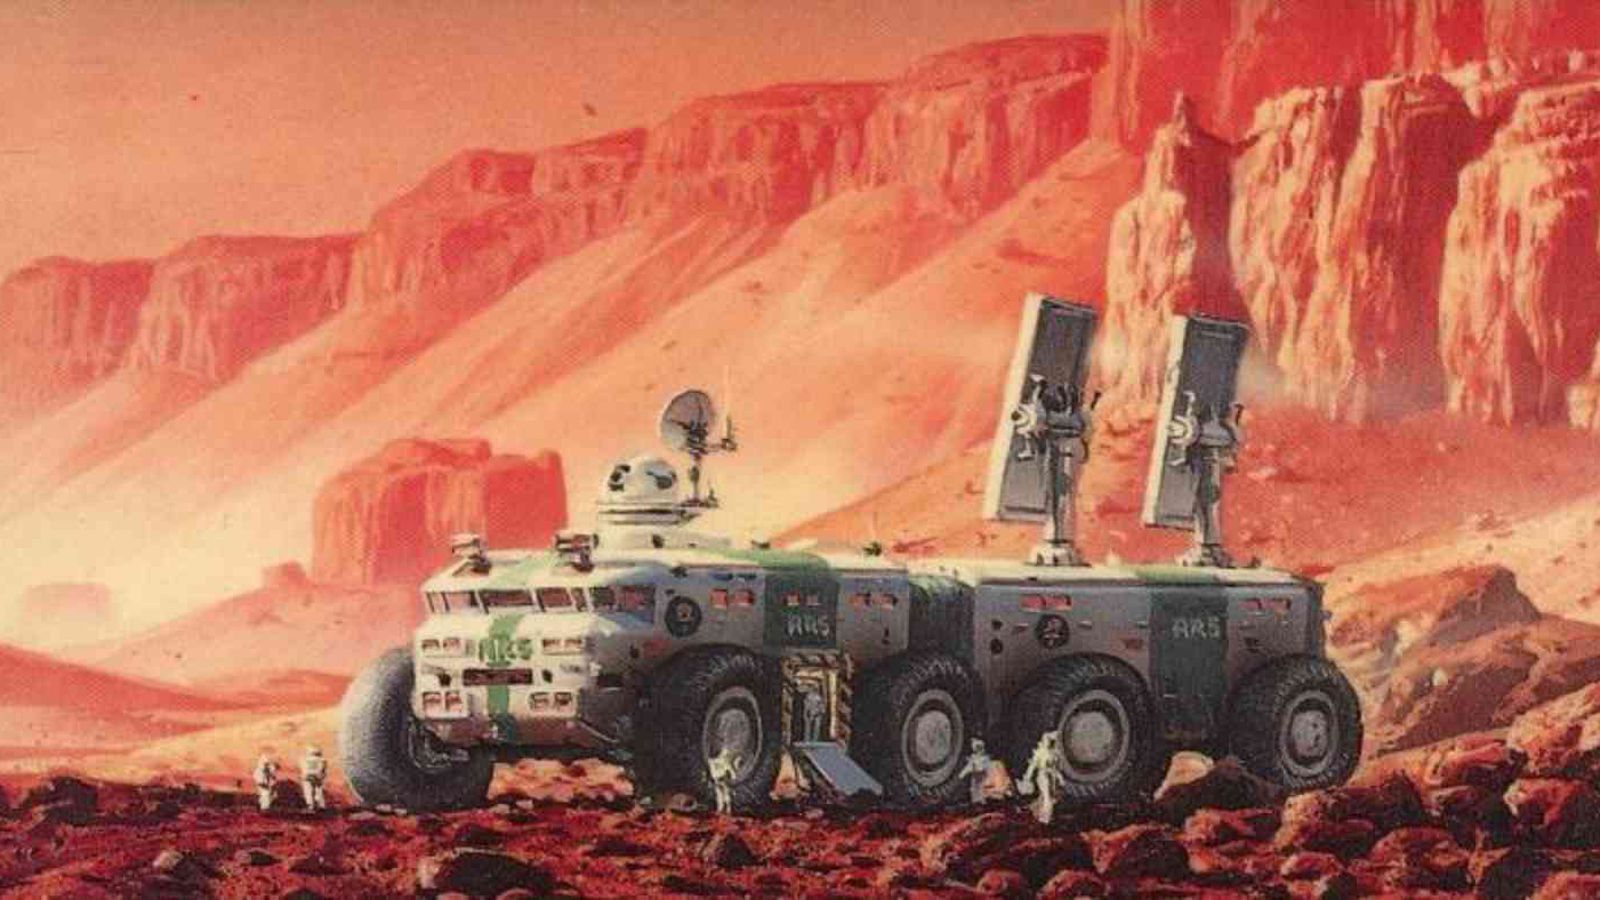 How science fiction has imagined colonizing our Solar System and beyond